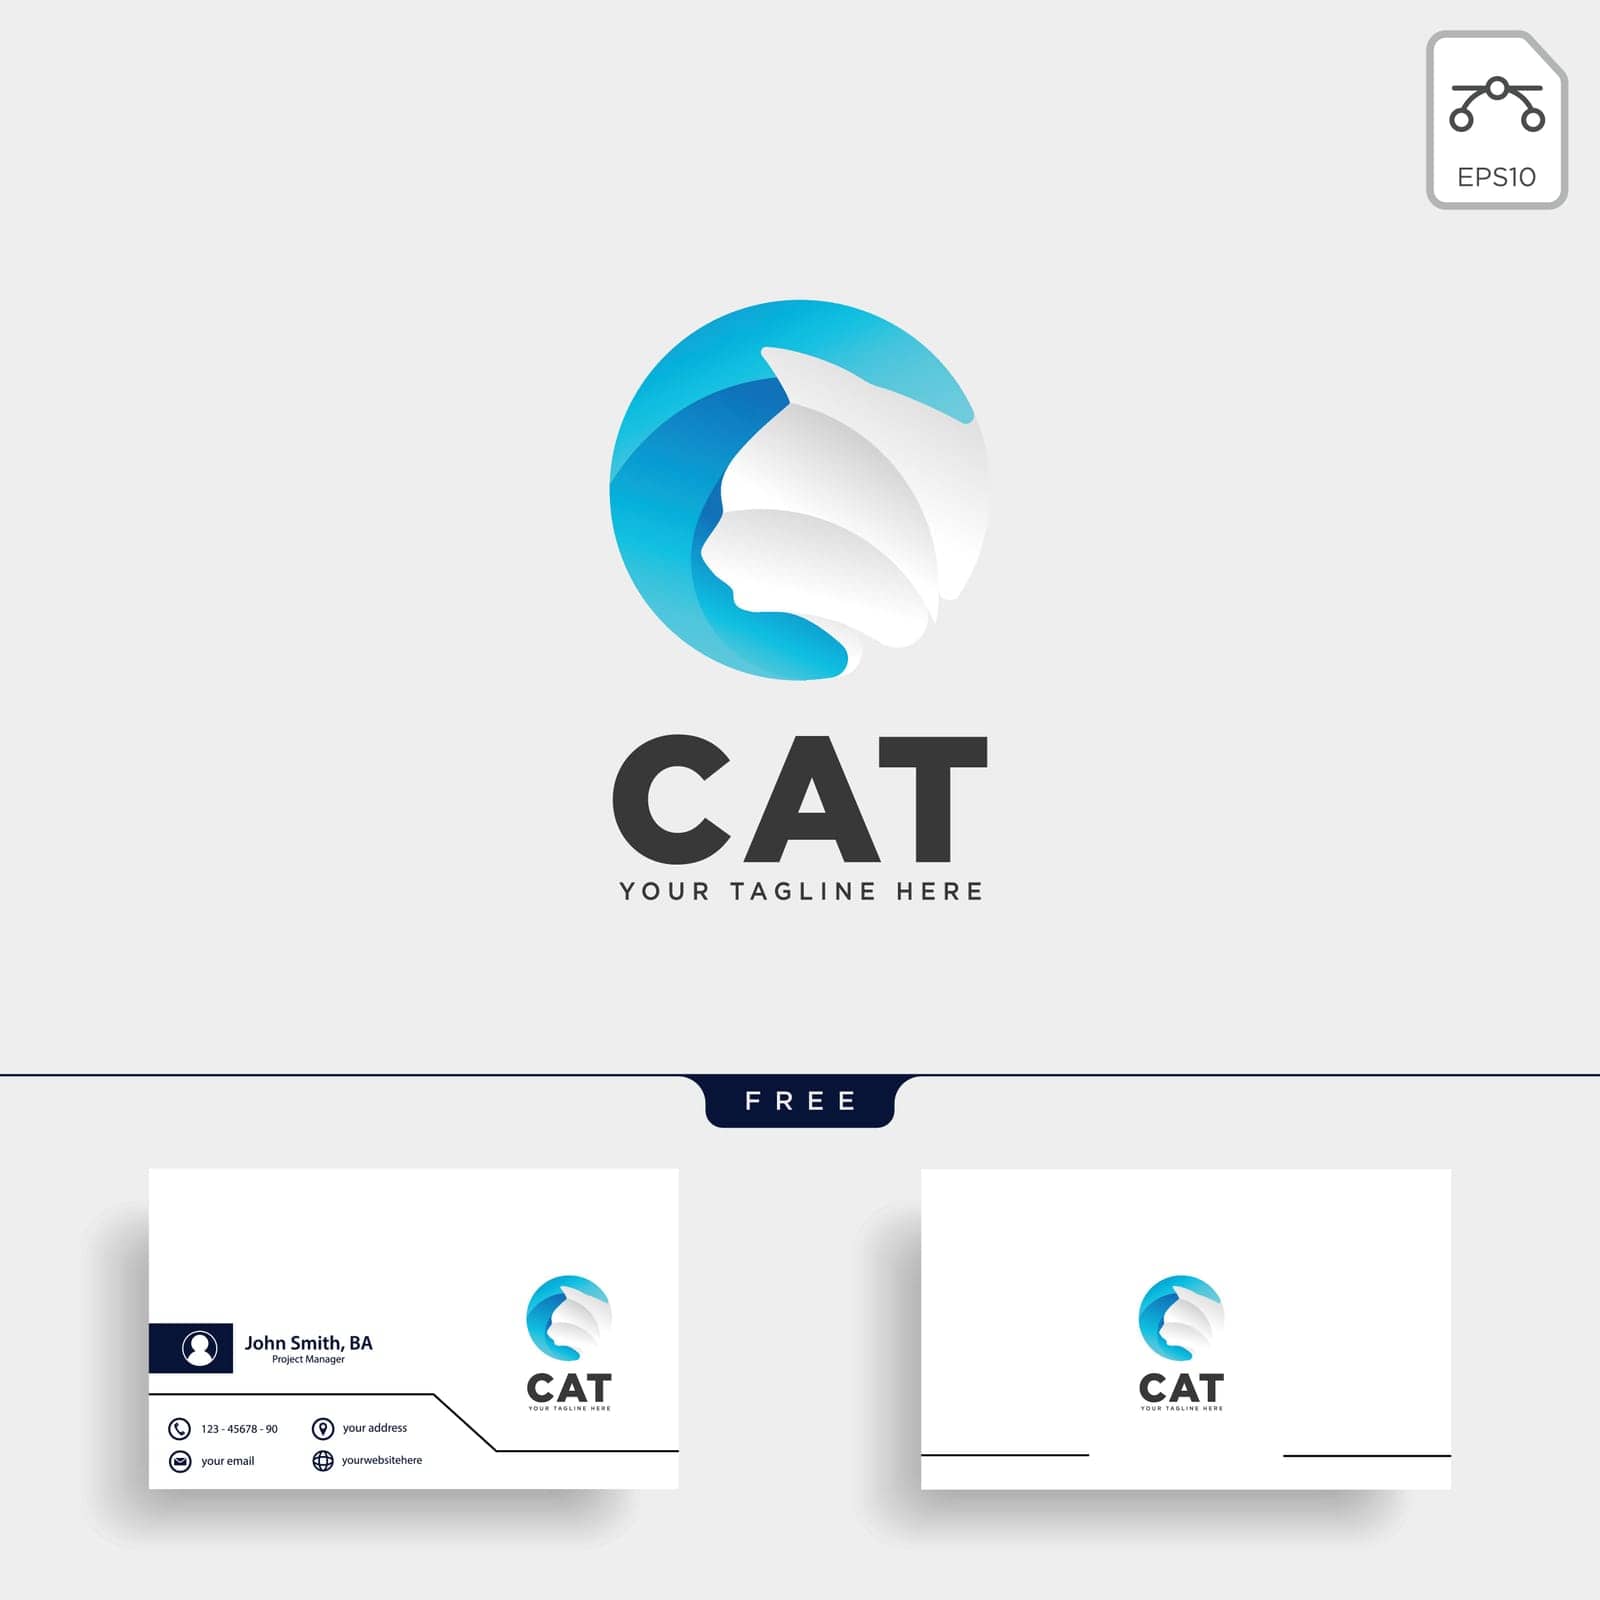 template,pets,pet,food,logo,text,concept,icon,sign,simple,lab,type,cat,clinic,space,care,negative,kitten,heart,love,animal,design,vector,health,element,vet,c,business,hearth,adopt,veterinary,club,creative,letter,typo,hospital,illustration,dog,house,home,friends by ogqcorp